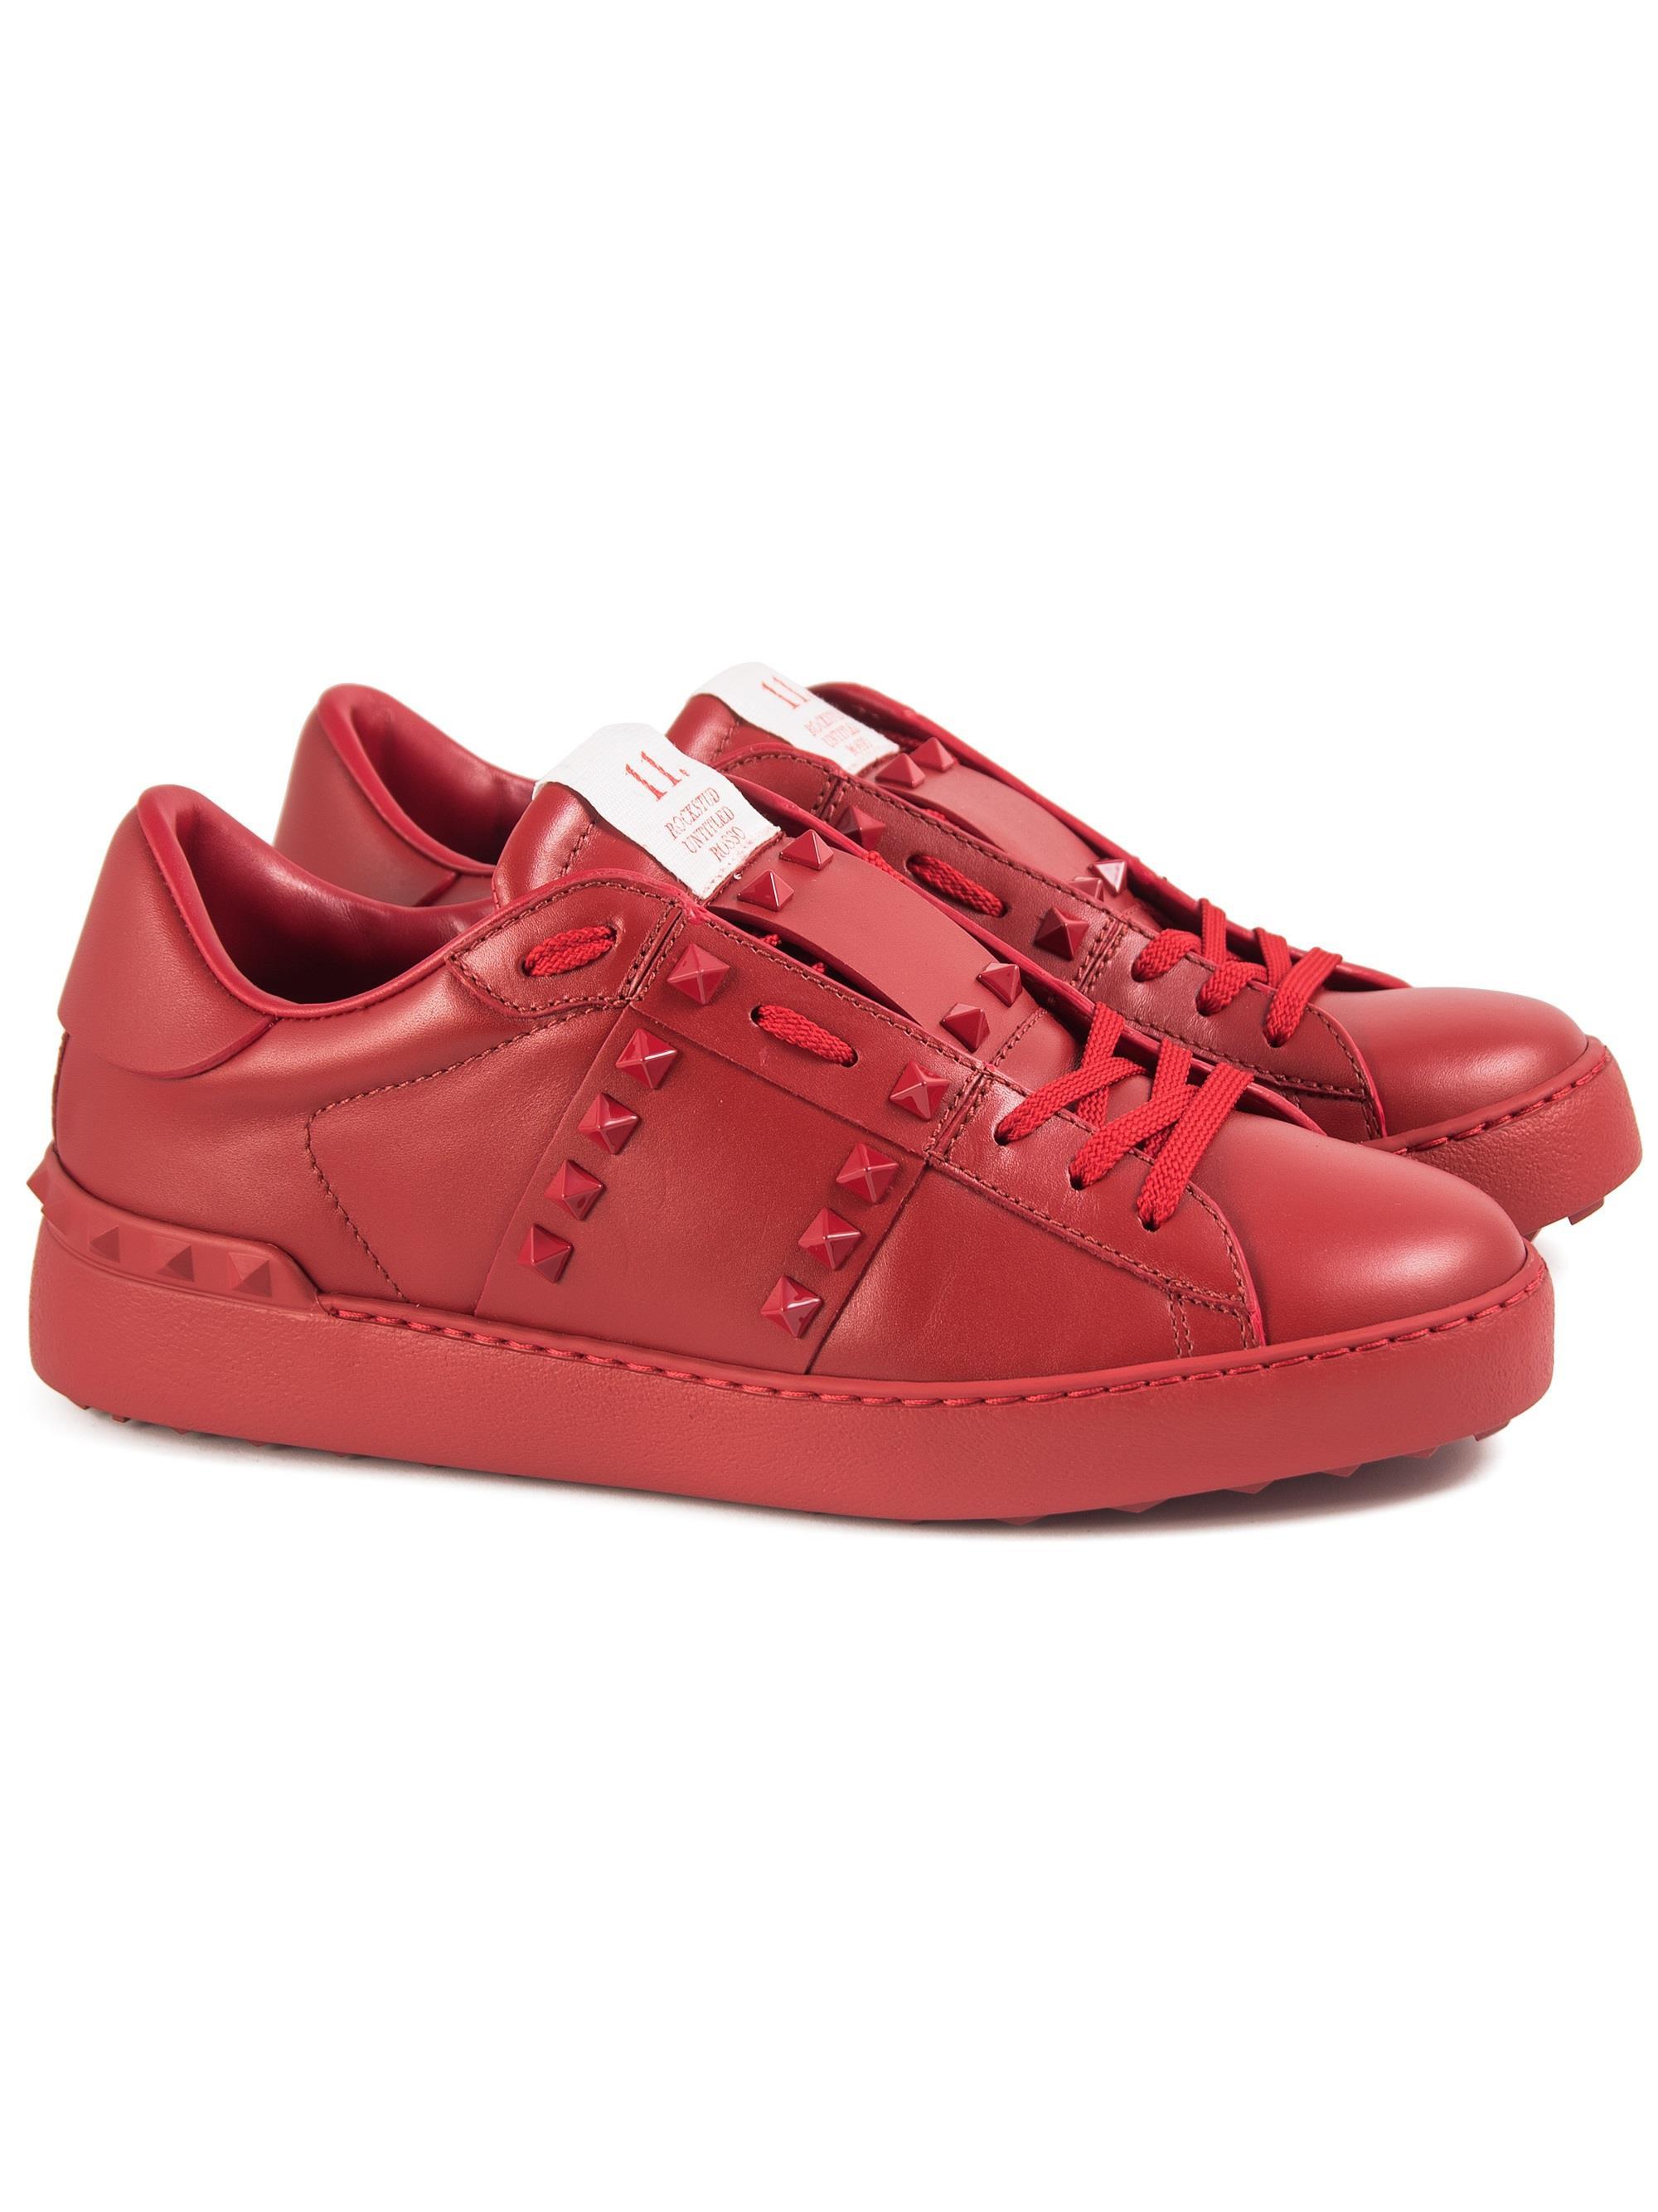 Valentino Leather Rockstud Untitled Rosso Sneaker in Red | Lyst